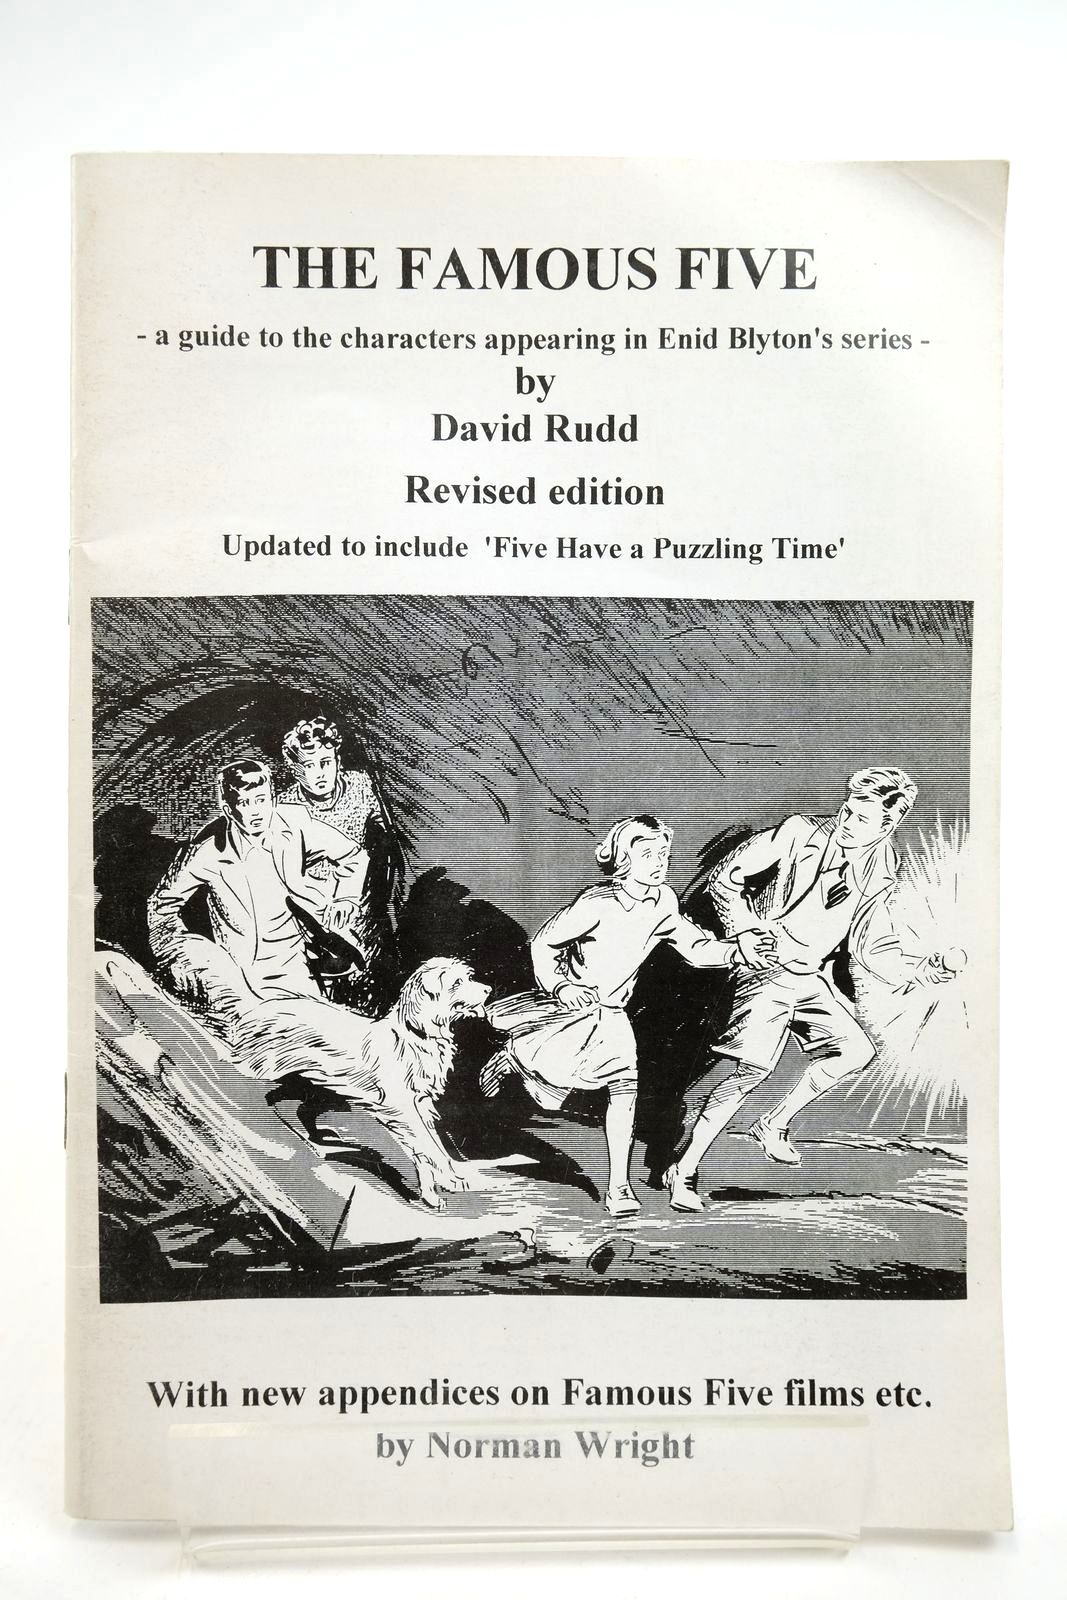 Photo of THE FAMOUSE FIVE - A GUIDE TO THE CHARACTERS APPEARING IN ENID BLTON'S SERIES written by Rudd, David
Wright, Norman published by Norman Wright (STOCK CODE: 2139054)  for sale by Stella & Rose's Books